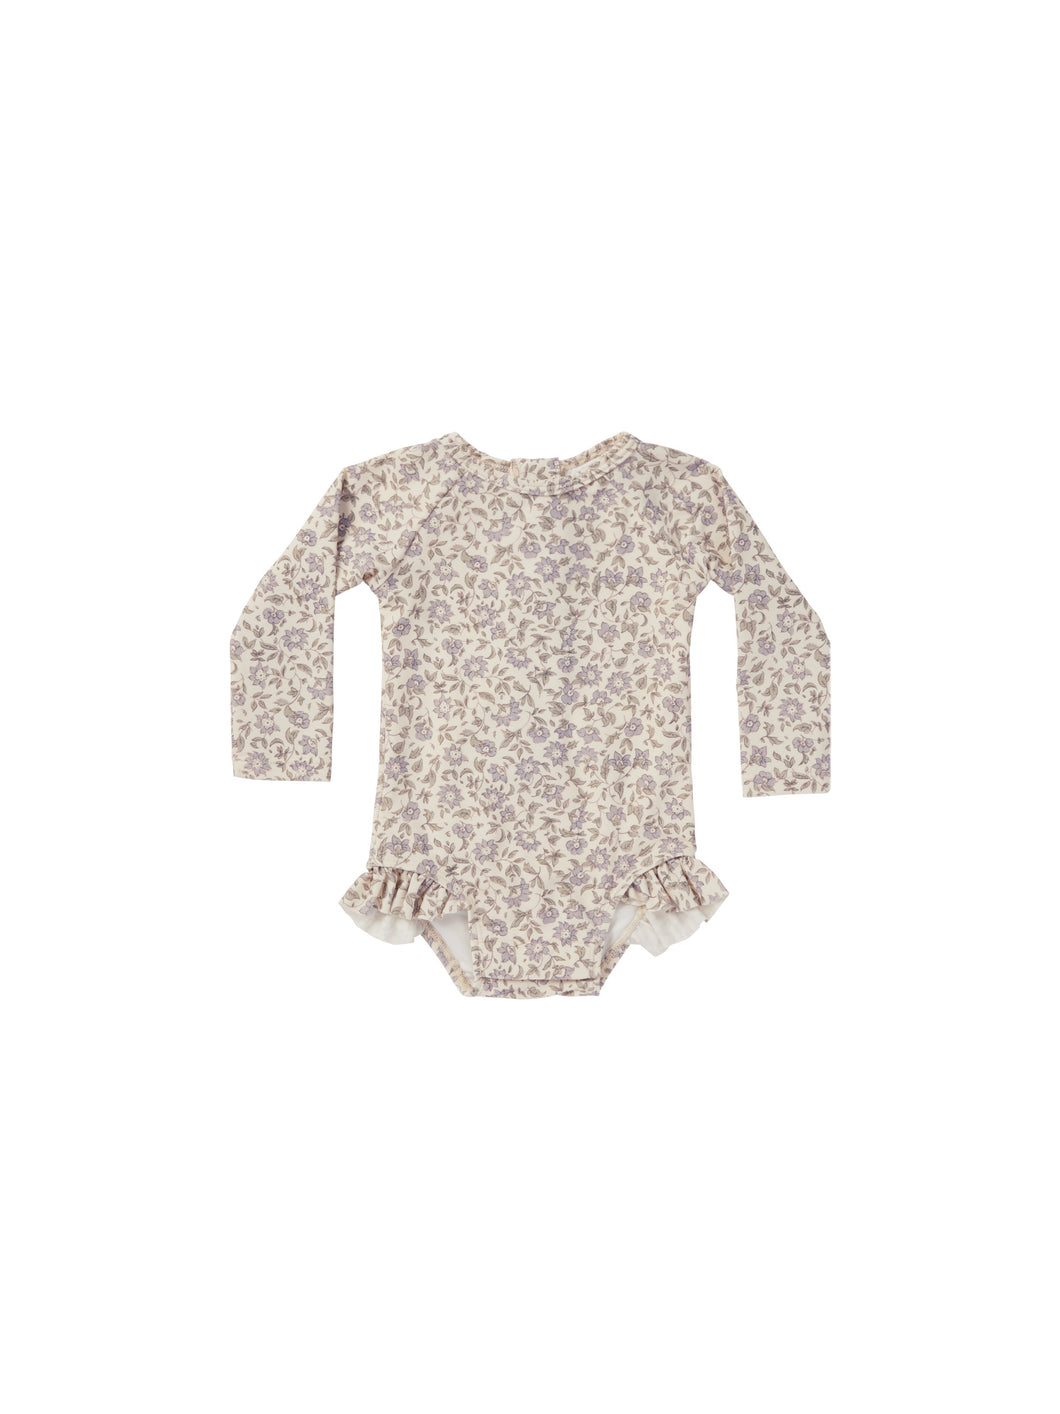 Beige long sleeve one-piece rash-guard with a blue floral all over print and ruffles around the hips.